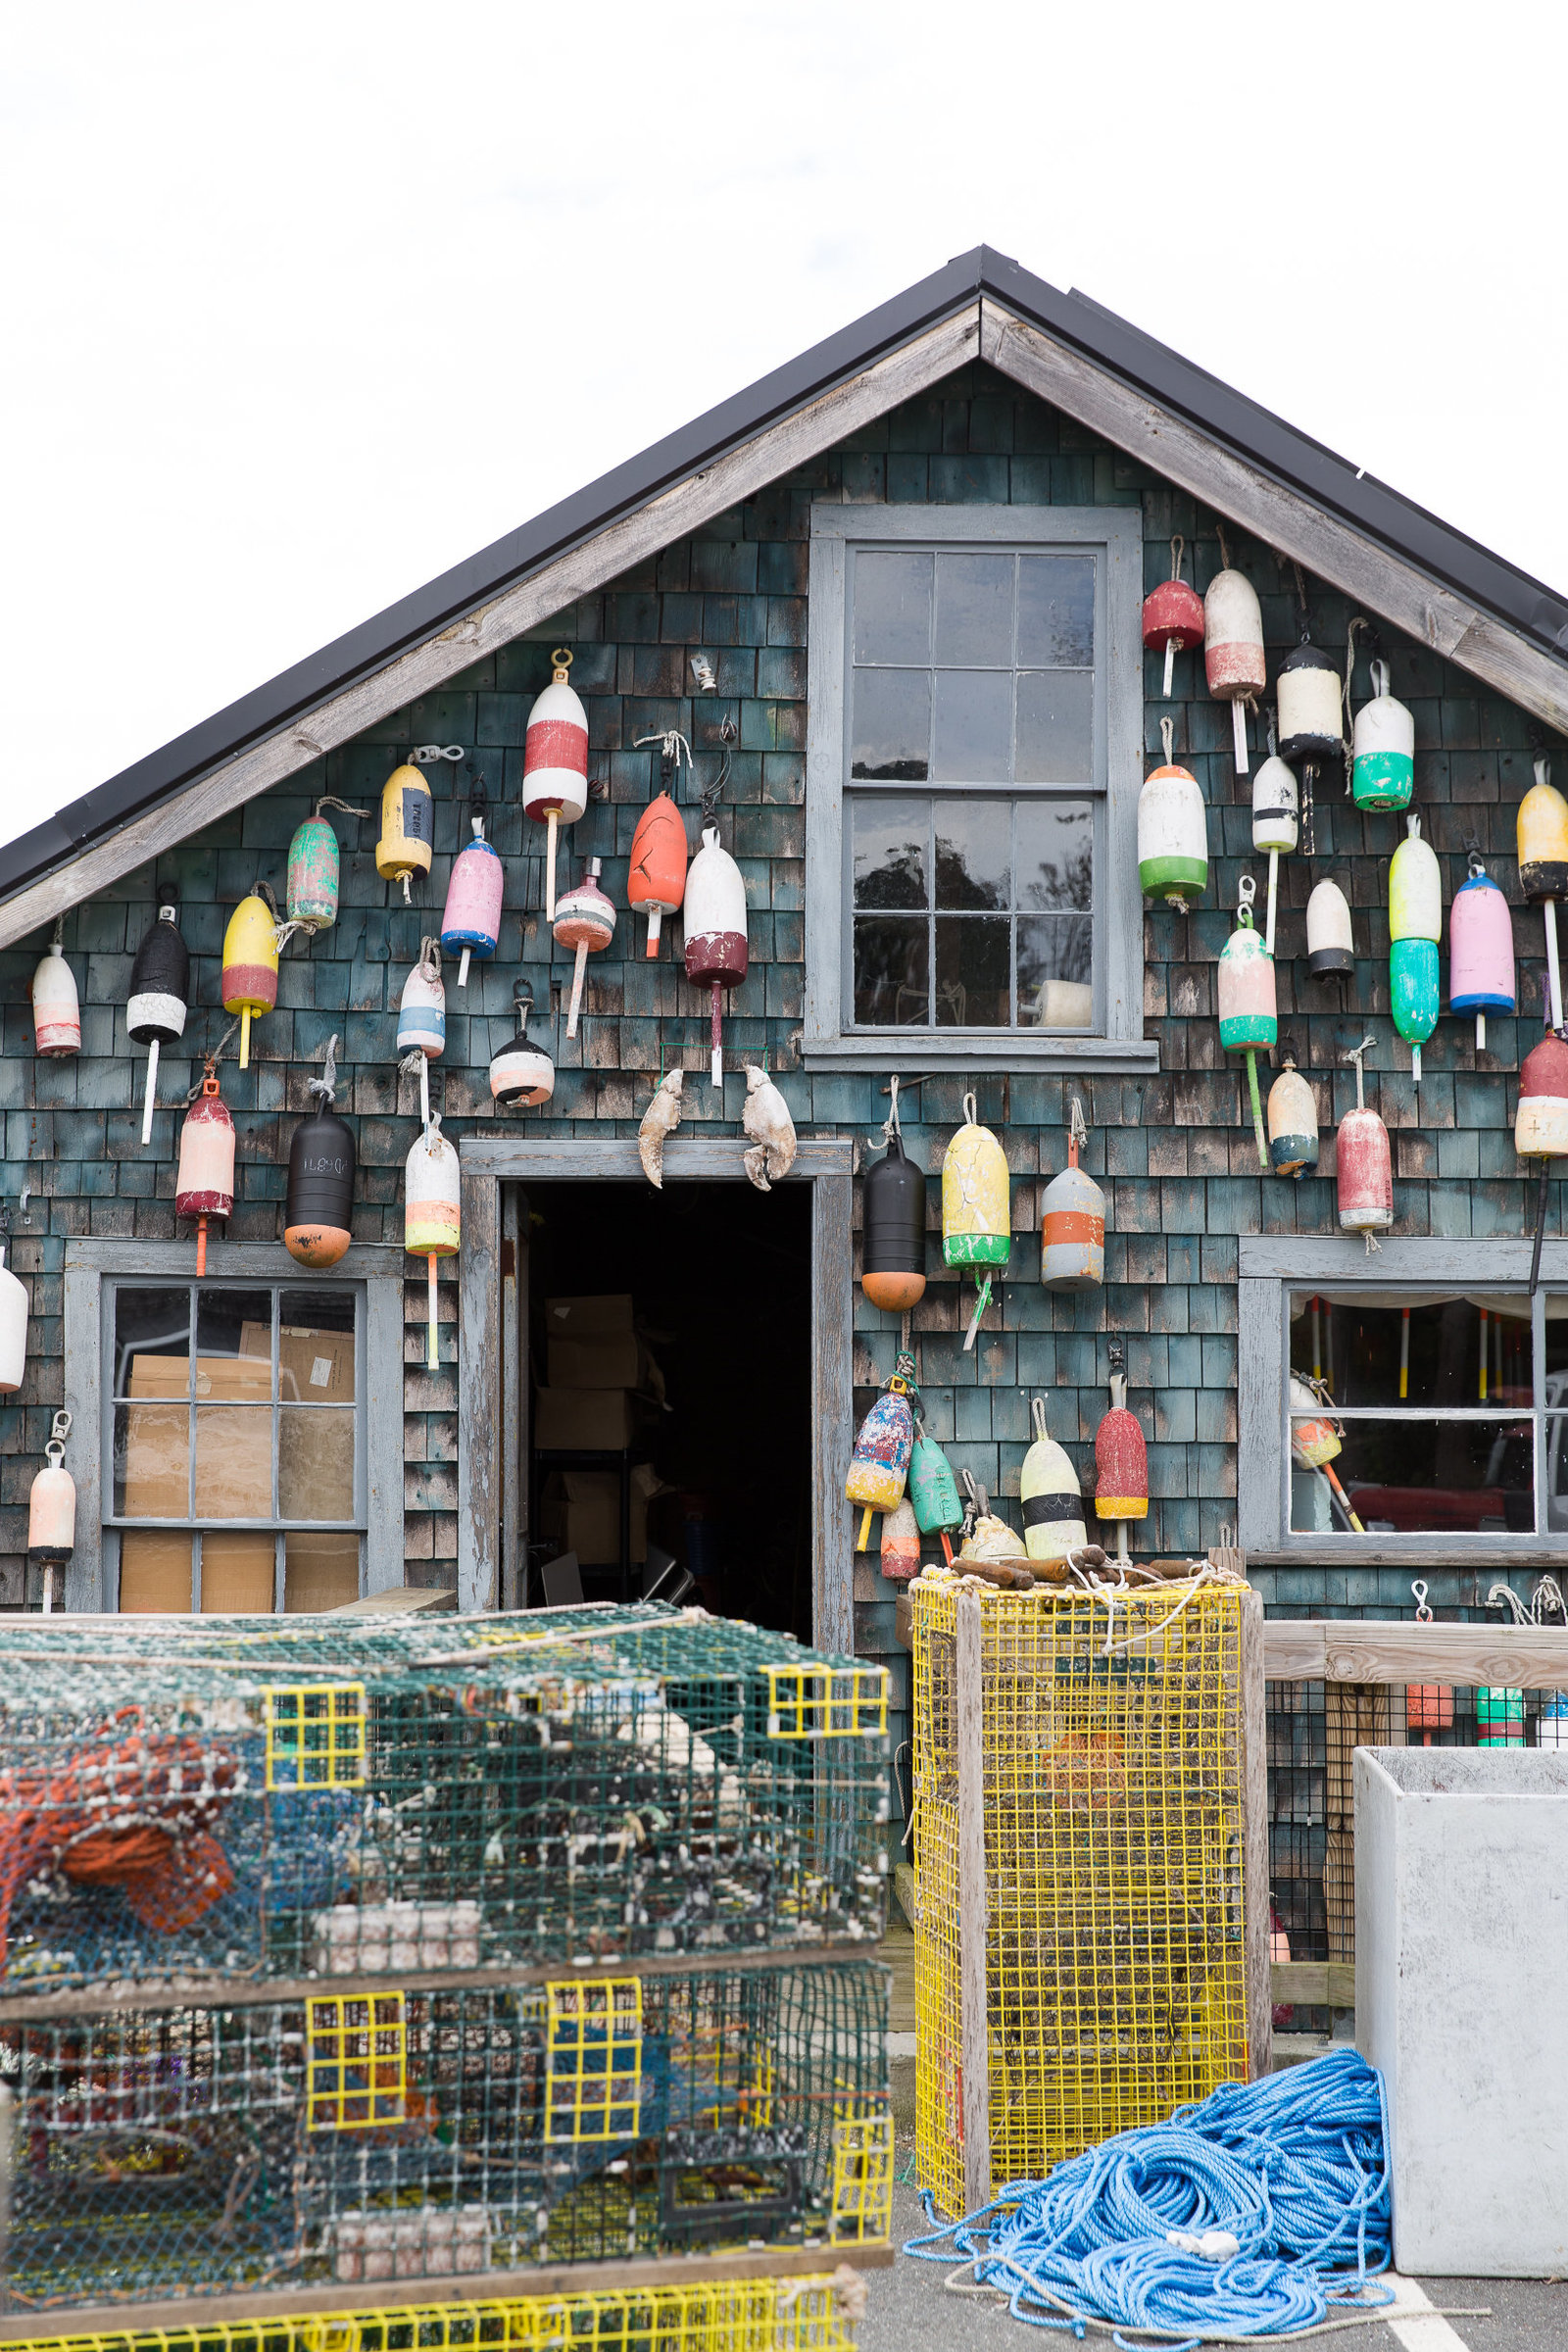 Lobster pots hanging on an old lobster shed in Maine